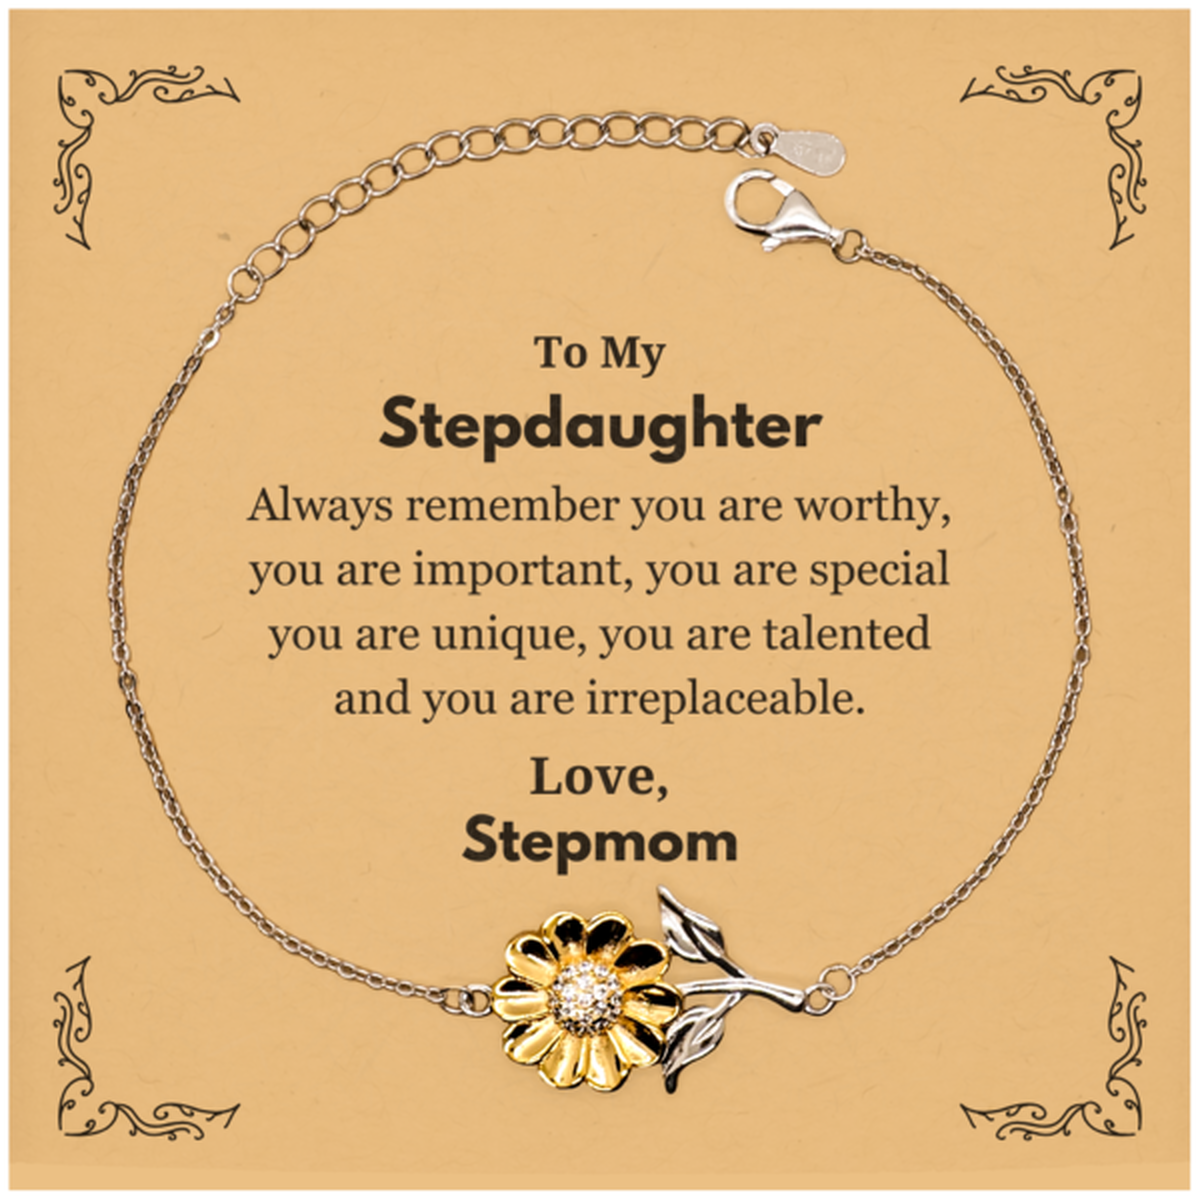 Stepdaughter Birthday Gifts from Stepmom, Inspirational Sunflower Bracelet for Stepdaughter Christmas Graduation Gifts for Stepdaughter Always remember you are worthy, you are important. Love, Stepmom